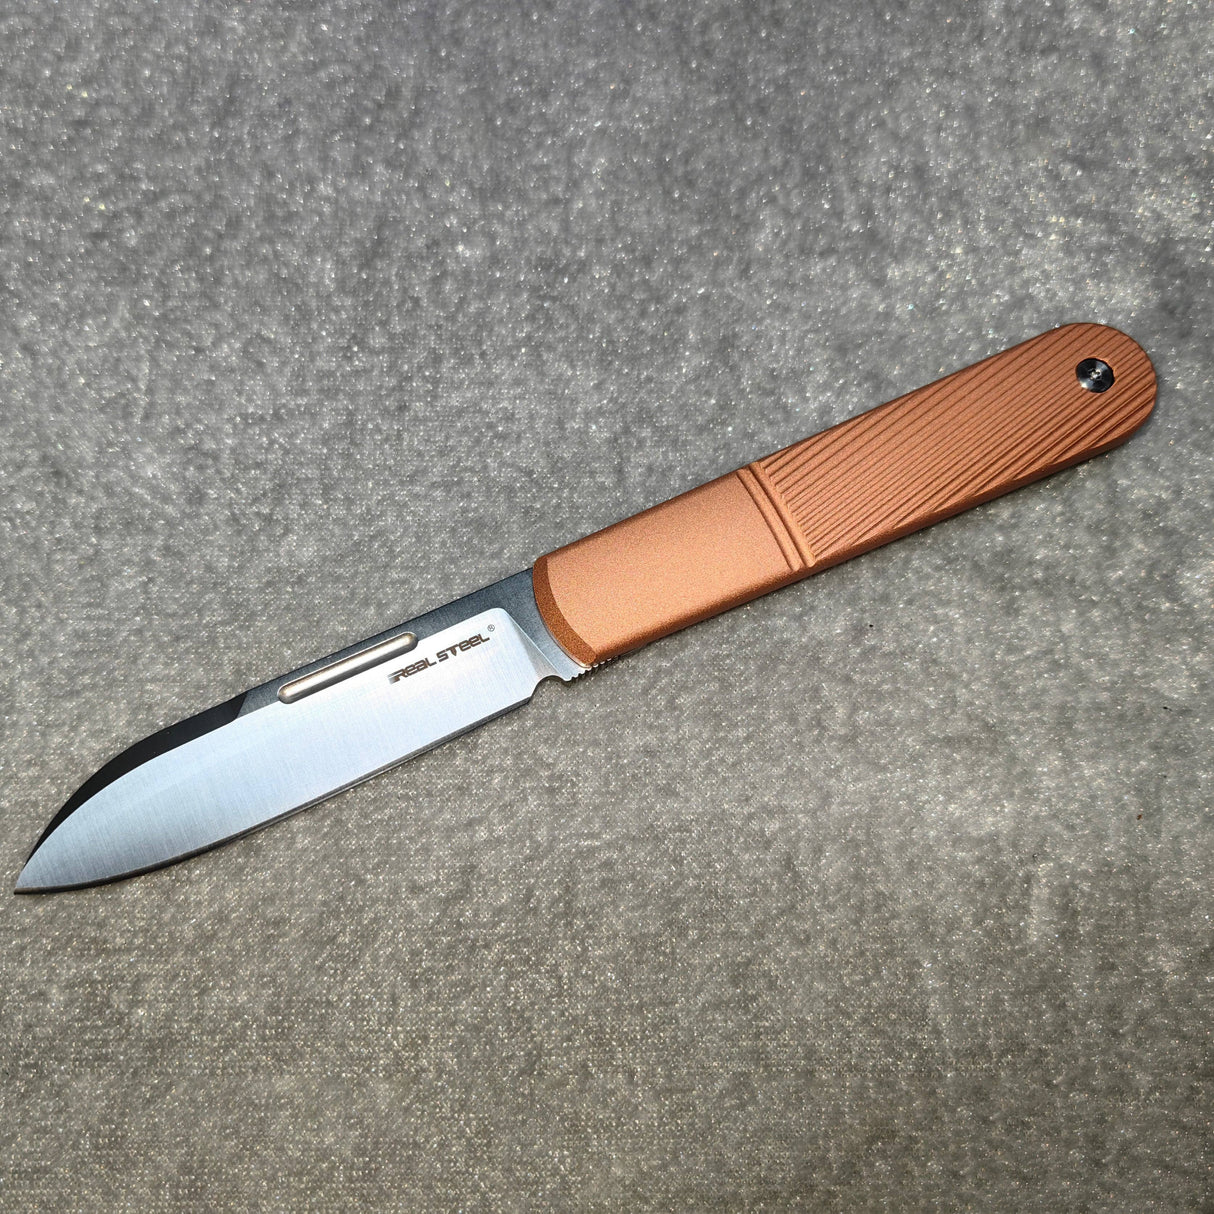 Real Steel Barlow RB5 Titanium / Copper / Brass Handle Scale set Accessories Real Steel Knives Real Steel Knives www.realsteelknives.com